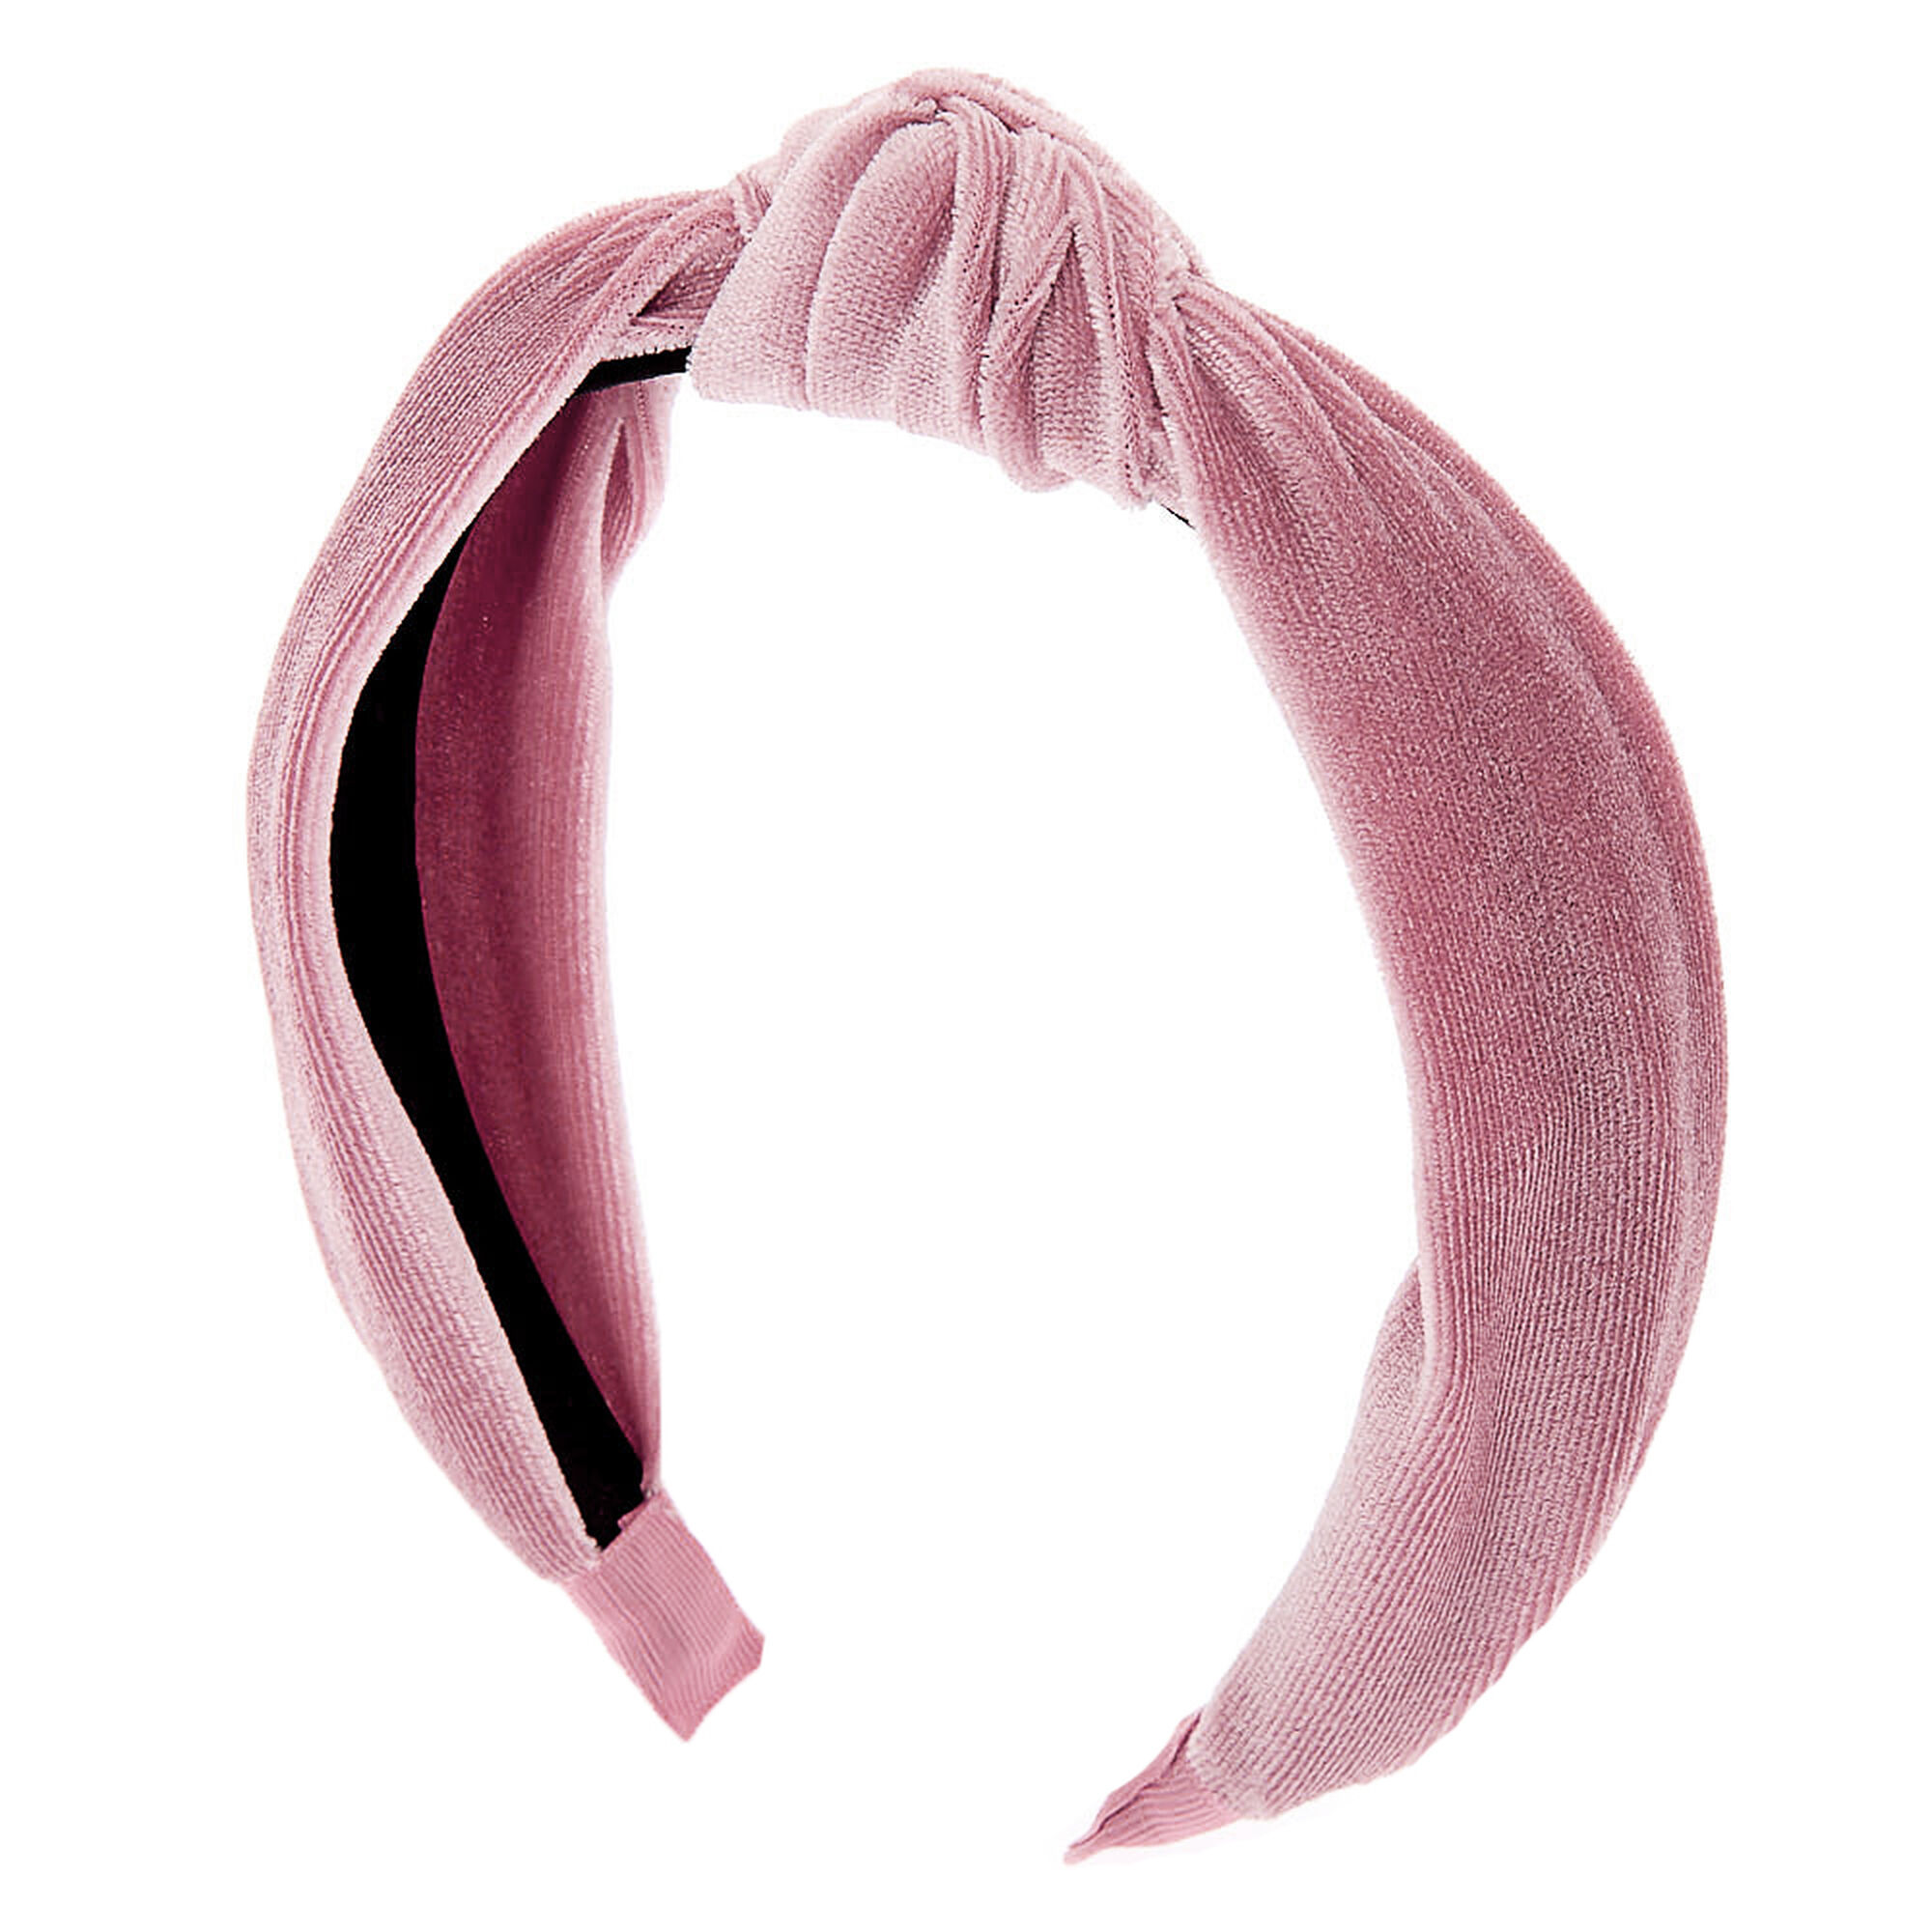 Claire's Accessories - Velvet Knotted Headband - Pink